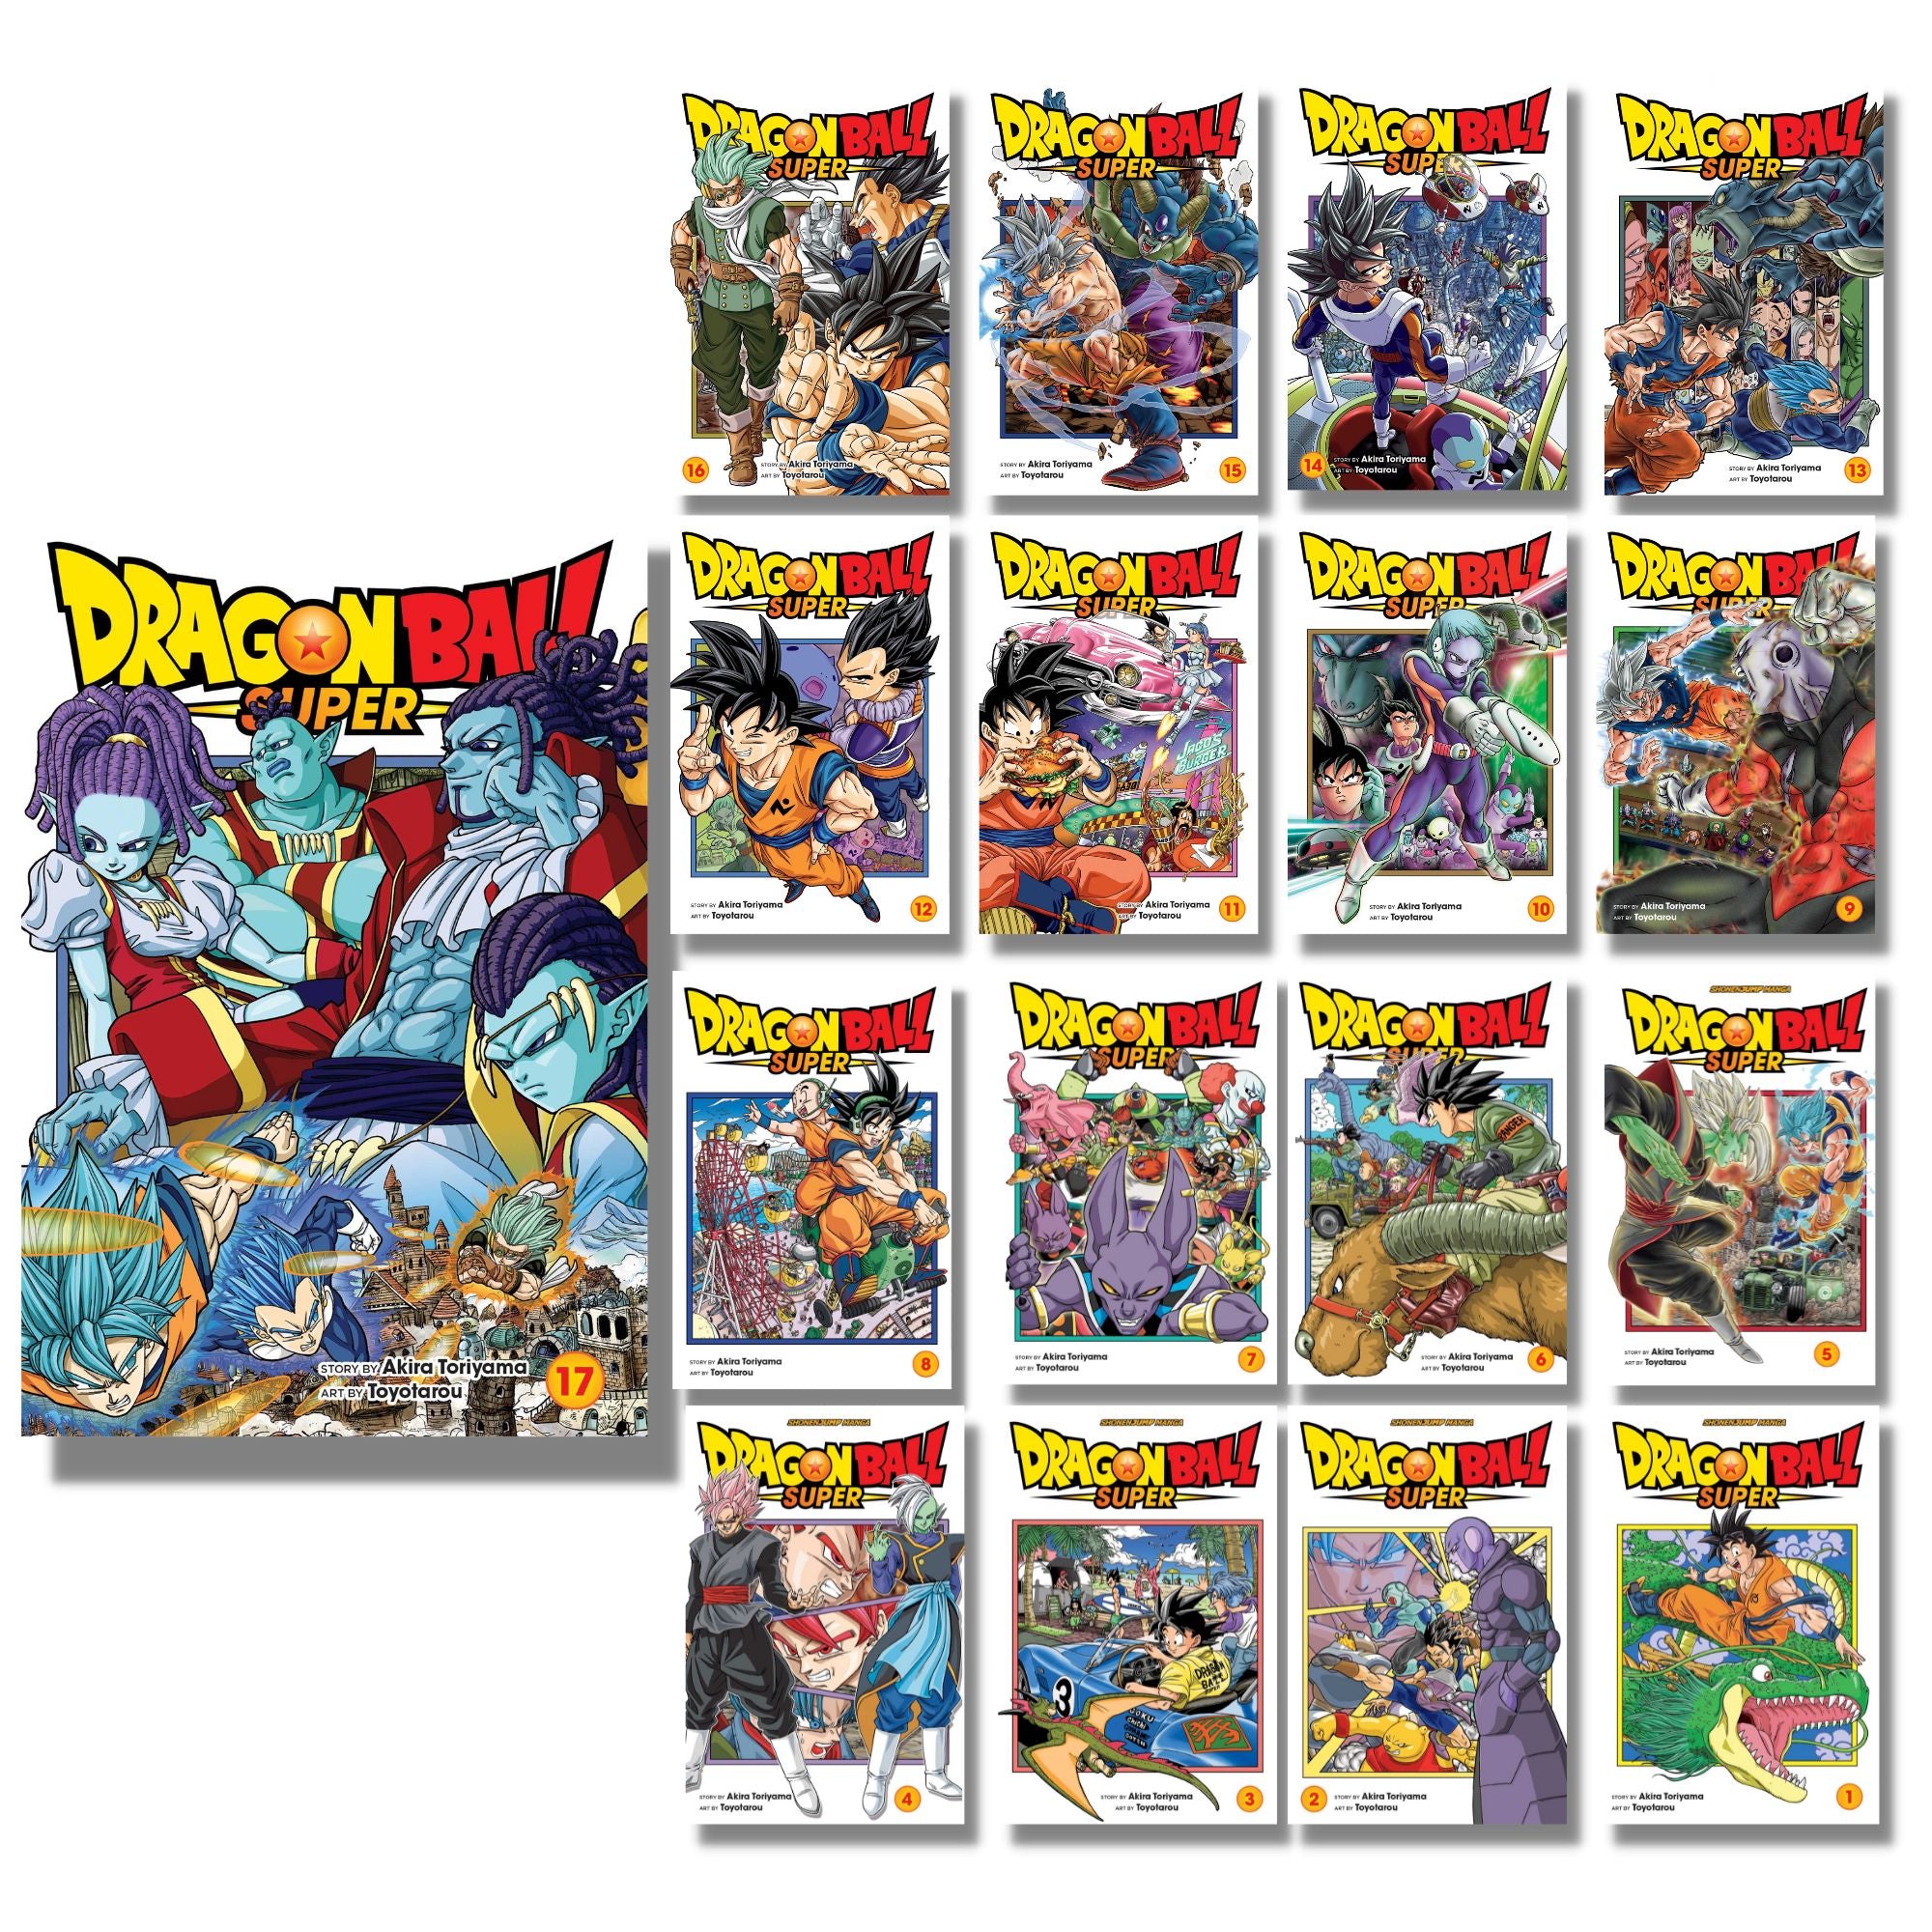 Dragon Ball Super Volume 17 Out Now!]